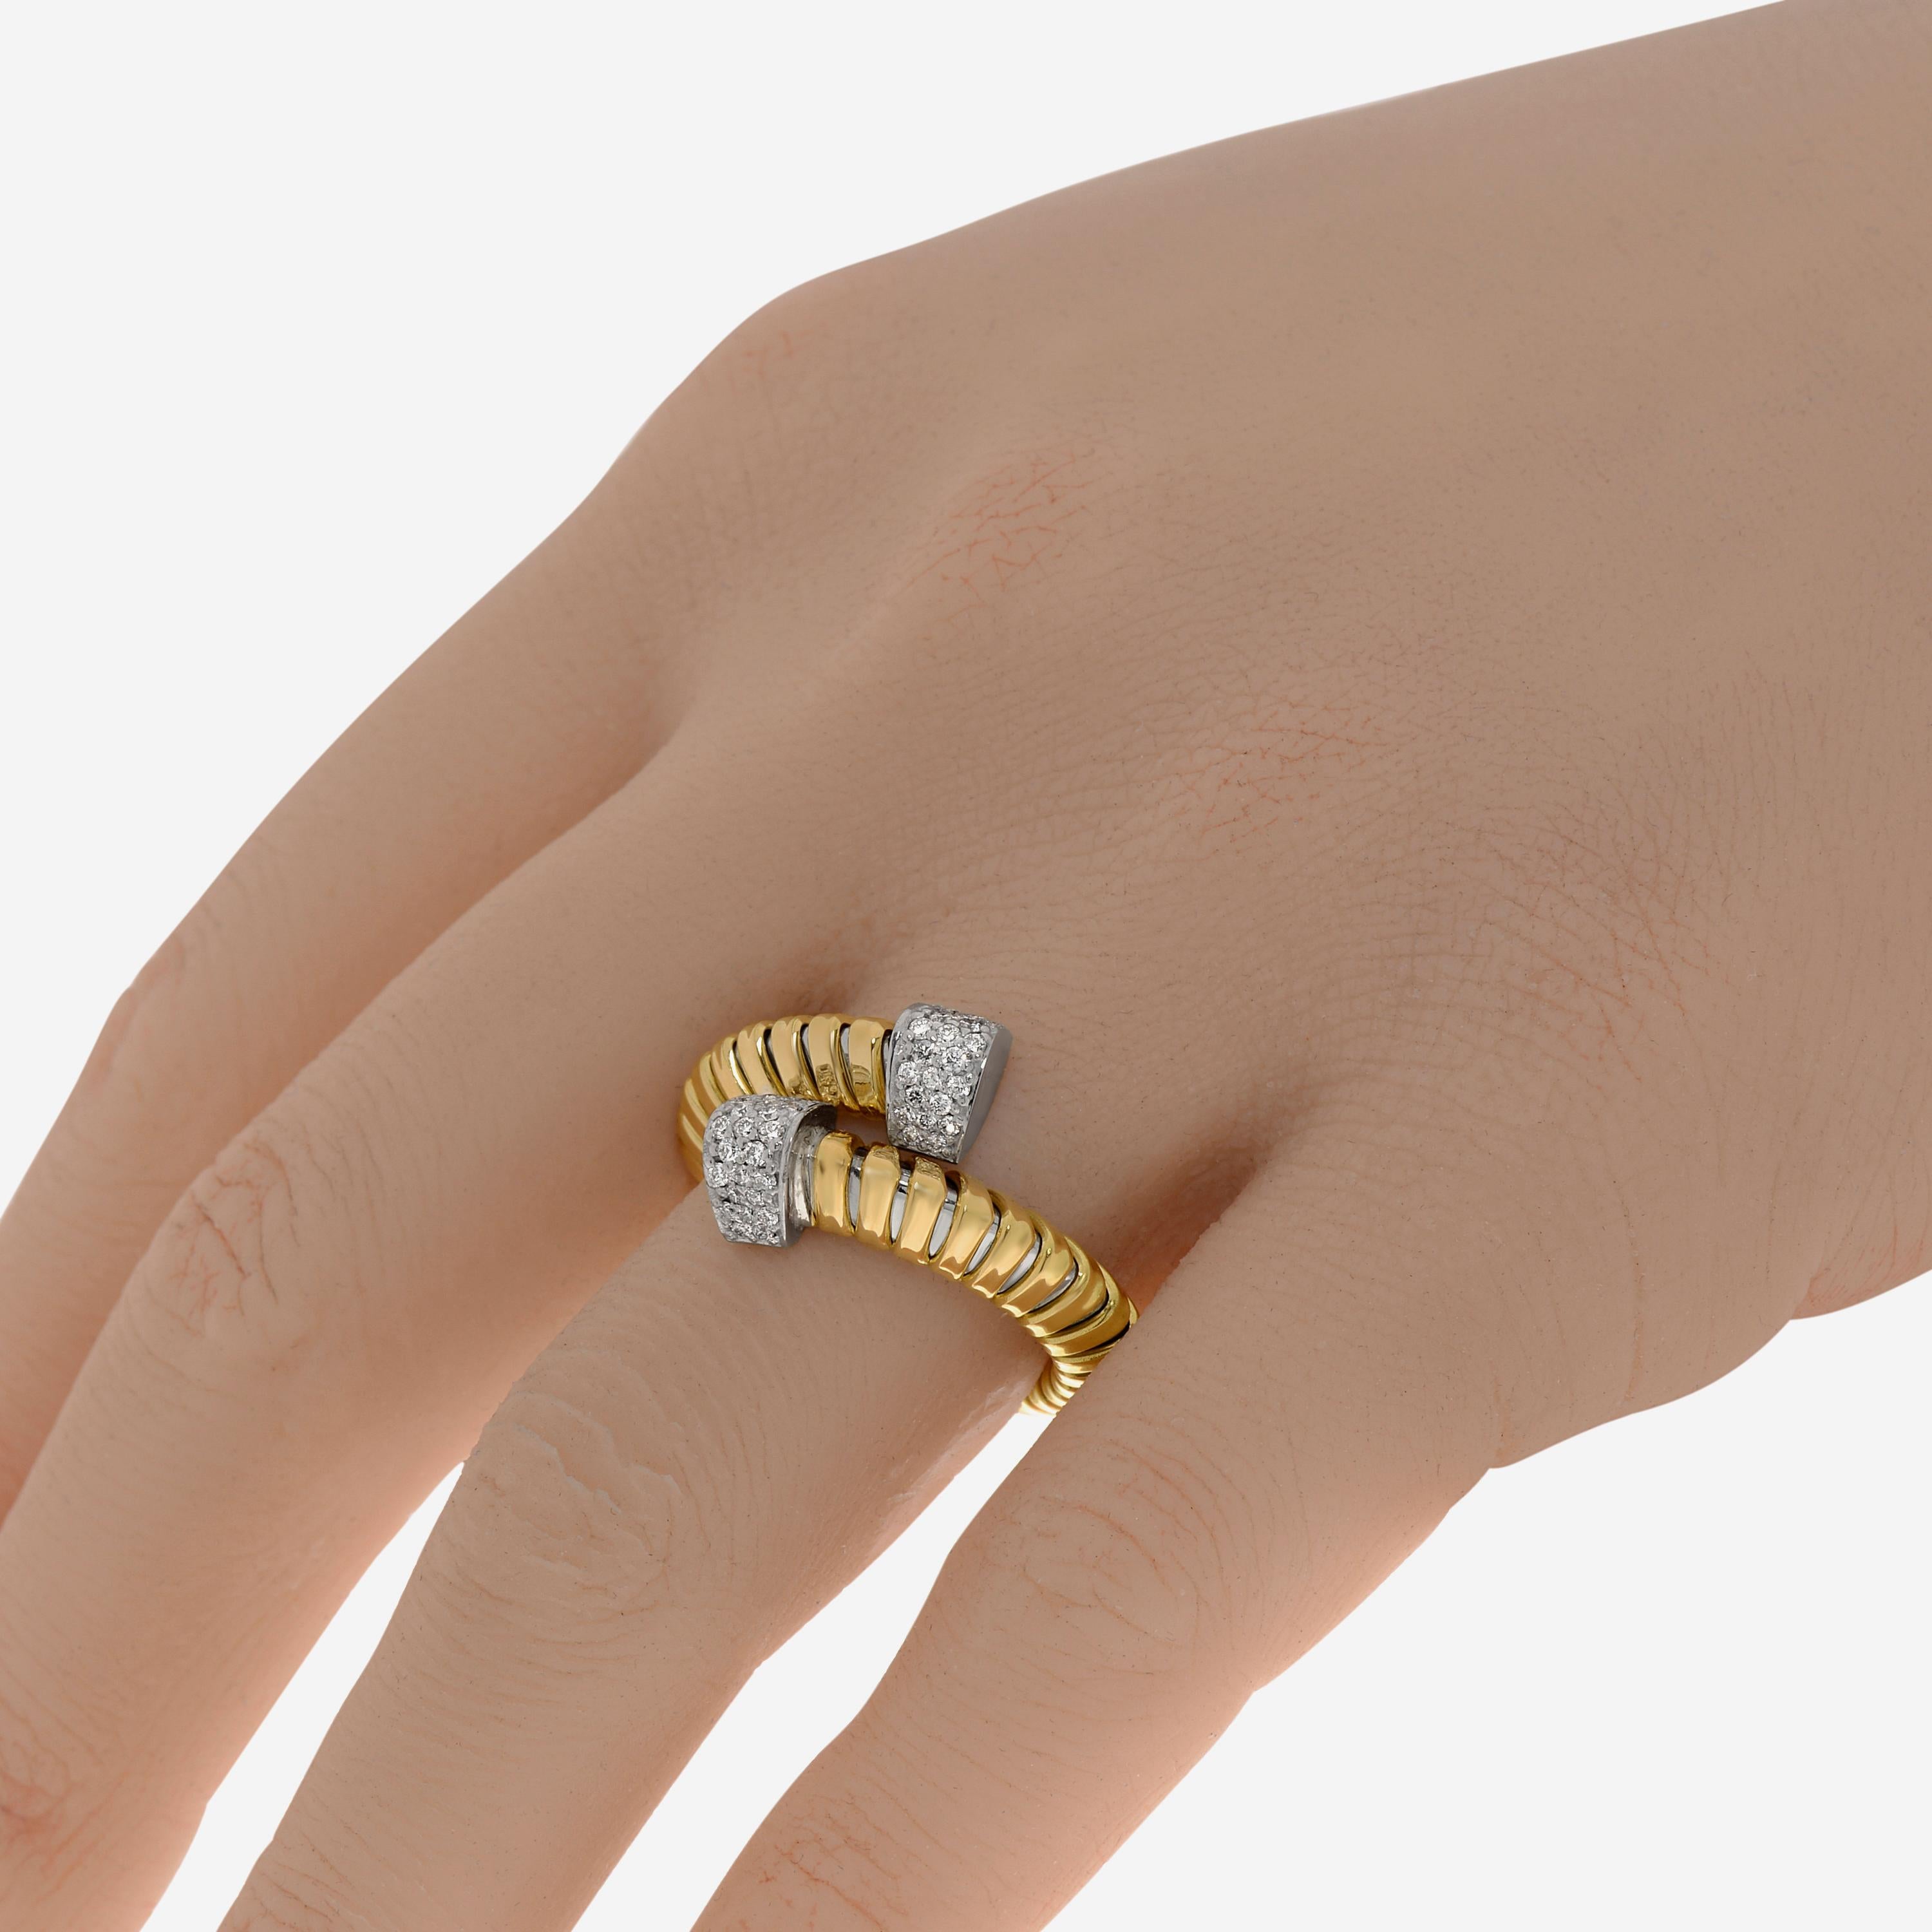 Tessitore Tubogas 18K yellow gold flexible ring features traditional tubogas details with 0.33ct. tw. diamonds. The ring size is 6.5 (53.1). The band width is 3/16